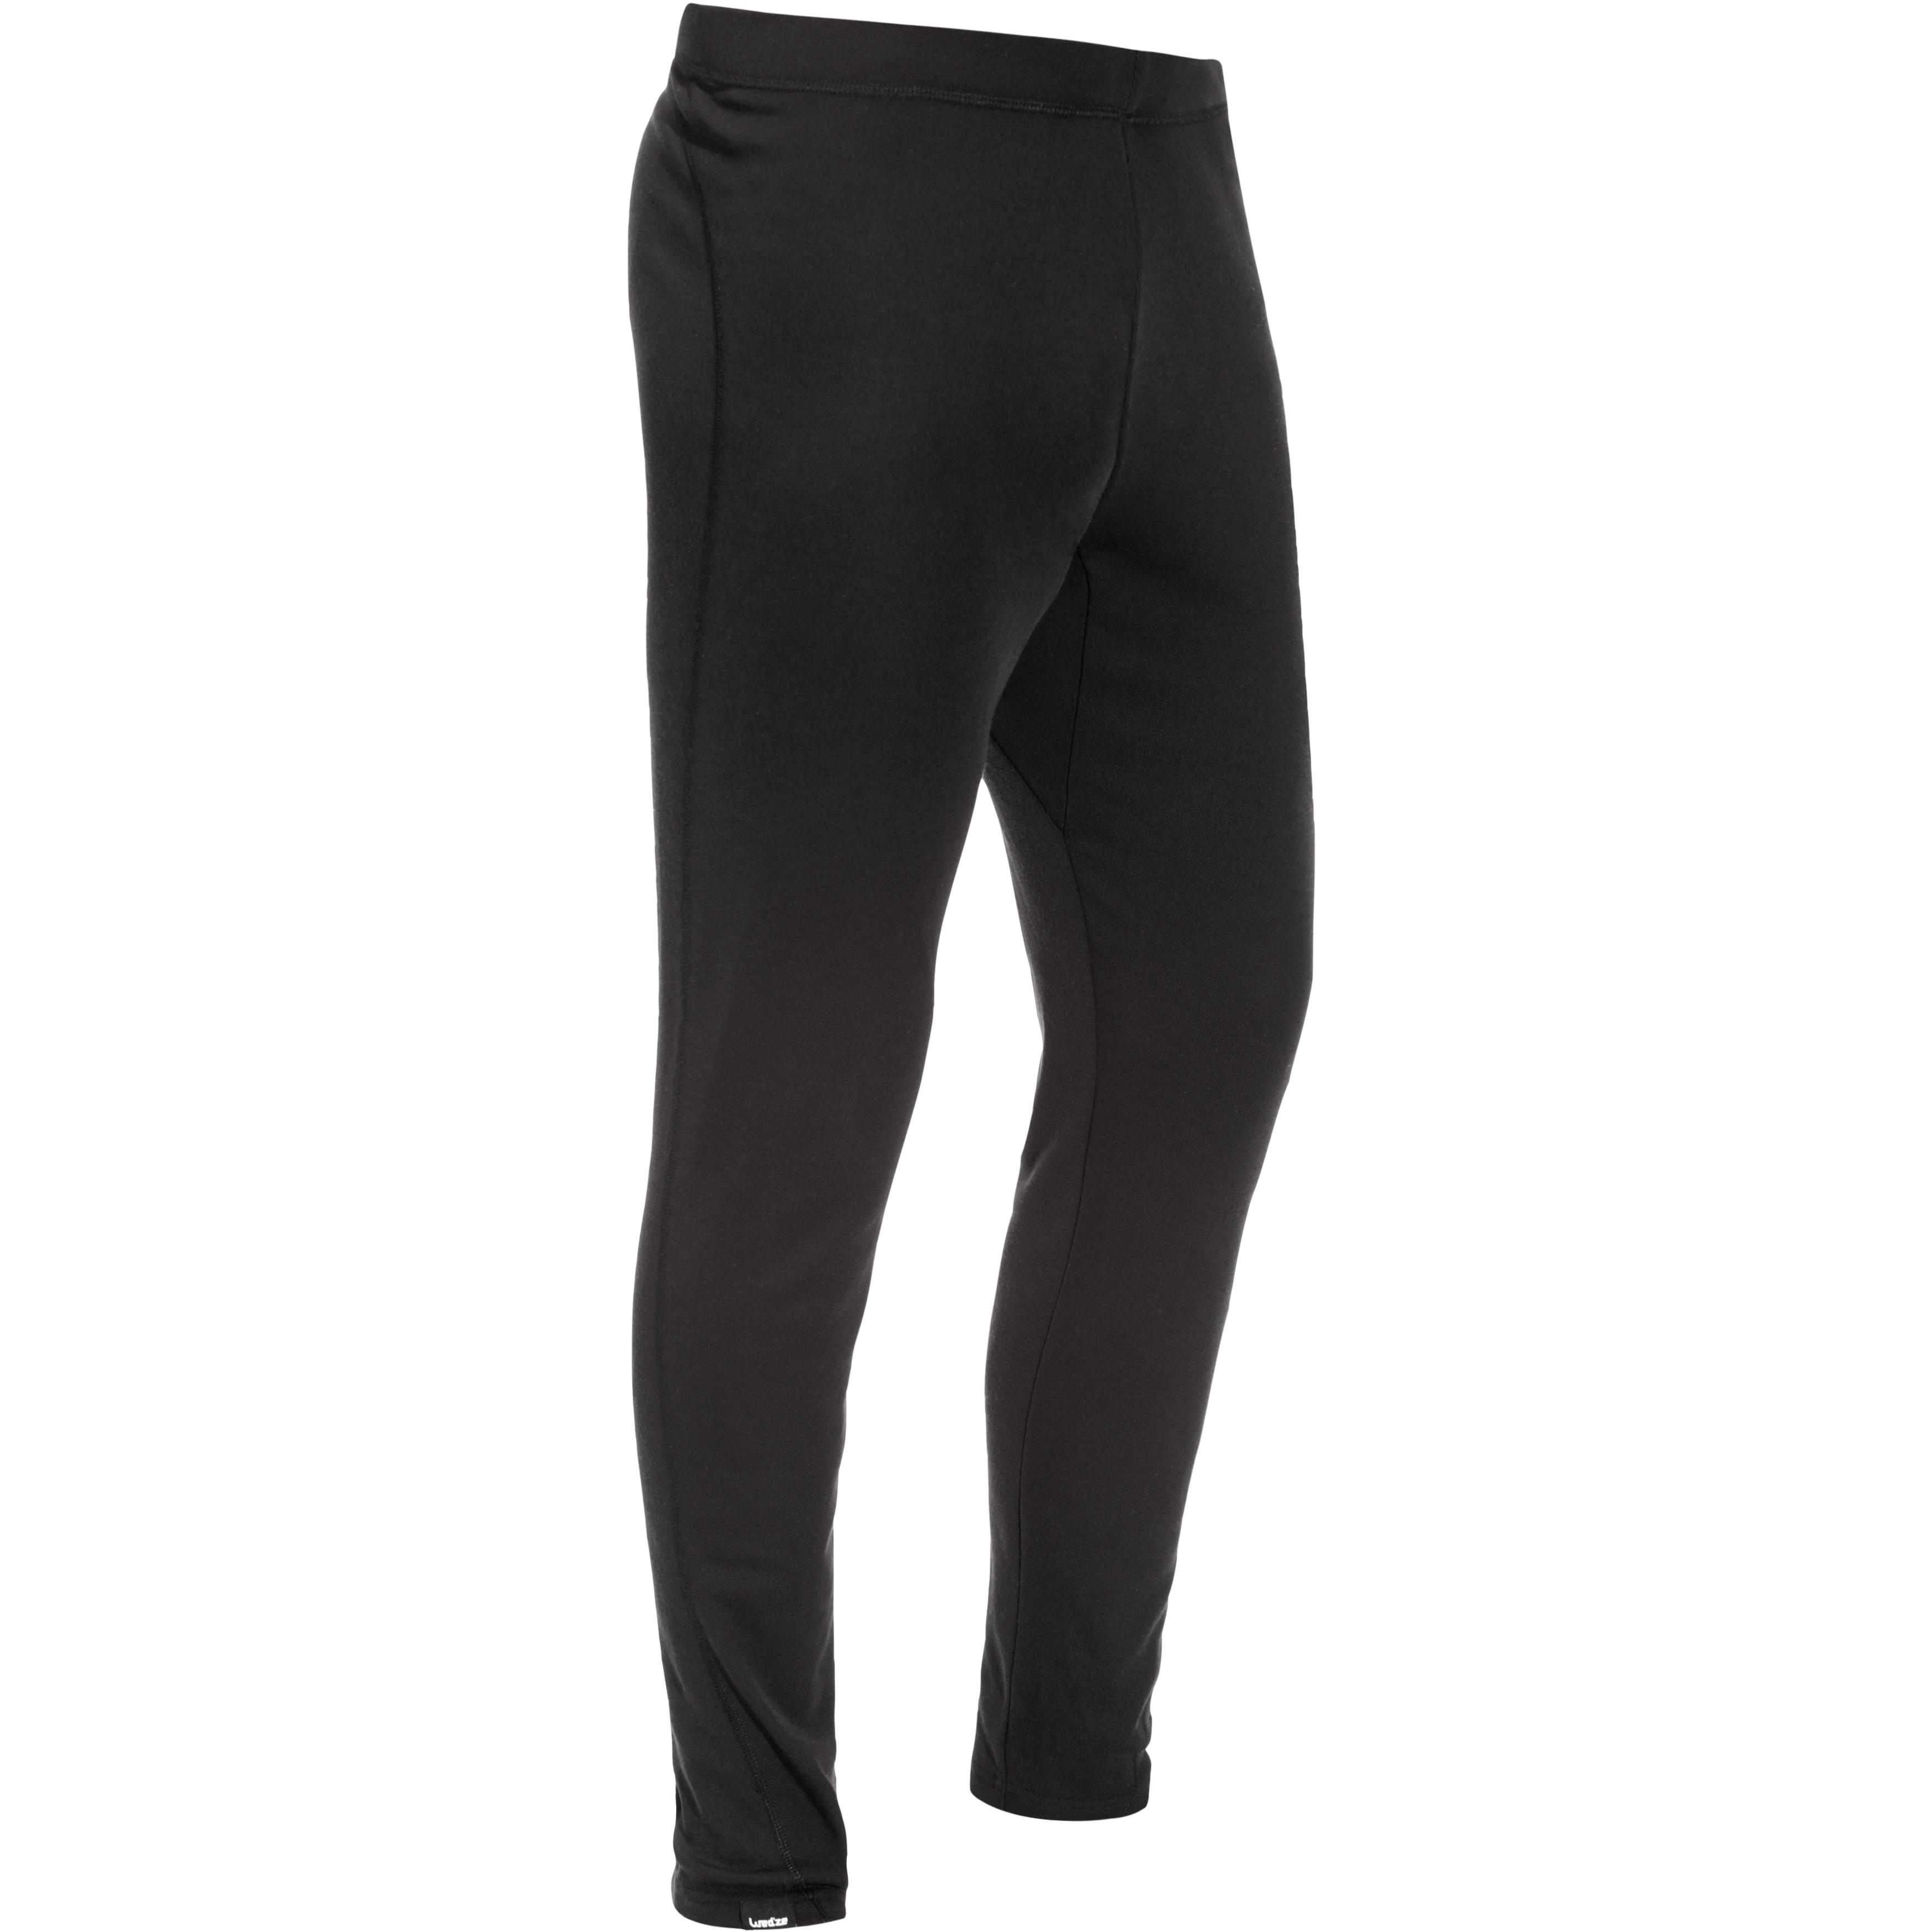 BUY THERMALS ONLINEMENS THERMALS2 YRS WARRANTY